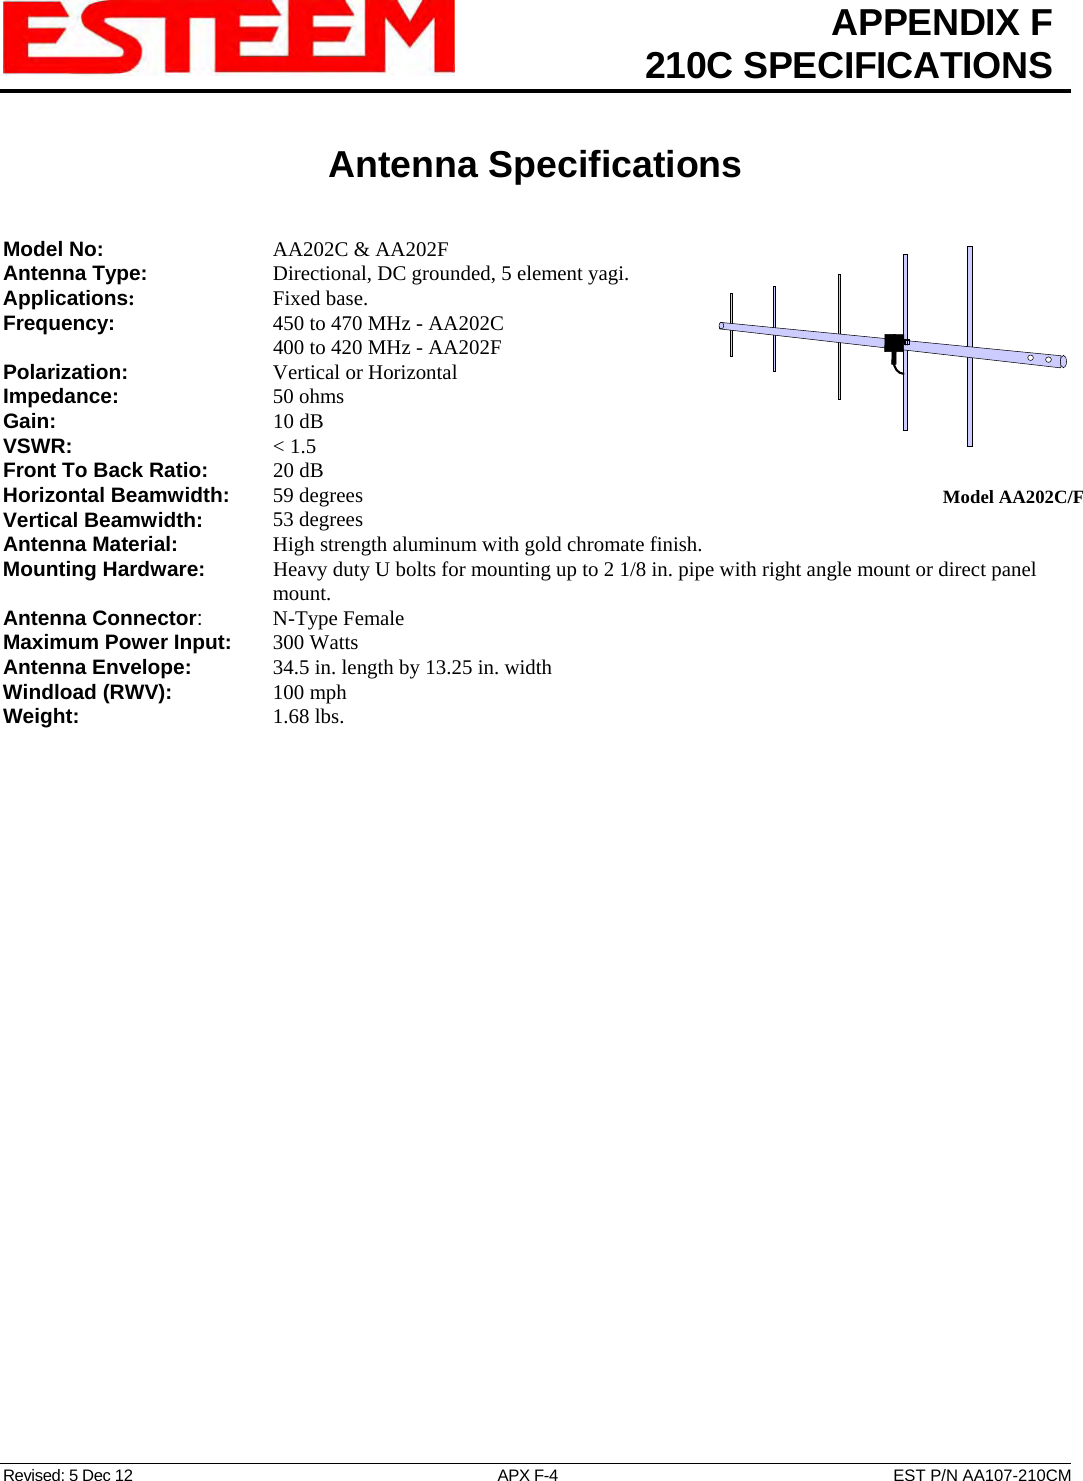  APPENDIX F  210C SPECIFICATIONS   Antenna Specifications   Revised: 5 Dec 12  APX F-4  EST P/N AA107-210CM  Model AA202C/FModel No:    AA202C &amp; AA202F Antenna Type:      Directional, DC grounded, 5 element yagi.  Applications:    Fixed base. Frequency:    450 to 470 MHz - AA202C       400 to 420 MHz - AA202F  Polarization:    Vertical or Horizontal Impedance:    50 ohms Gain:     10 dB VSWR:      &lt; 1.5  Front To Back Ratio:   20 dB Horizontal Beamwidth:  59 degrees Vertical Beamwidth:     53 degrees Antenna Material:     High strength aluminum with gold chromate finish.  Mounting Hardware:      Heavy duty U bolts for mounting up to 2 1/8 in. pipe with right angle mount or direct panel mount. Antenna Connector:   N-Type Female Maximum Power Input: 300 Watts Antenna Envelope:    34.5 in. length by 13.25 in. width Windload (RWV):   100 mph Weight:     1.68 lbs.        